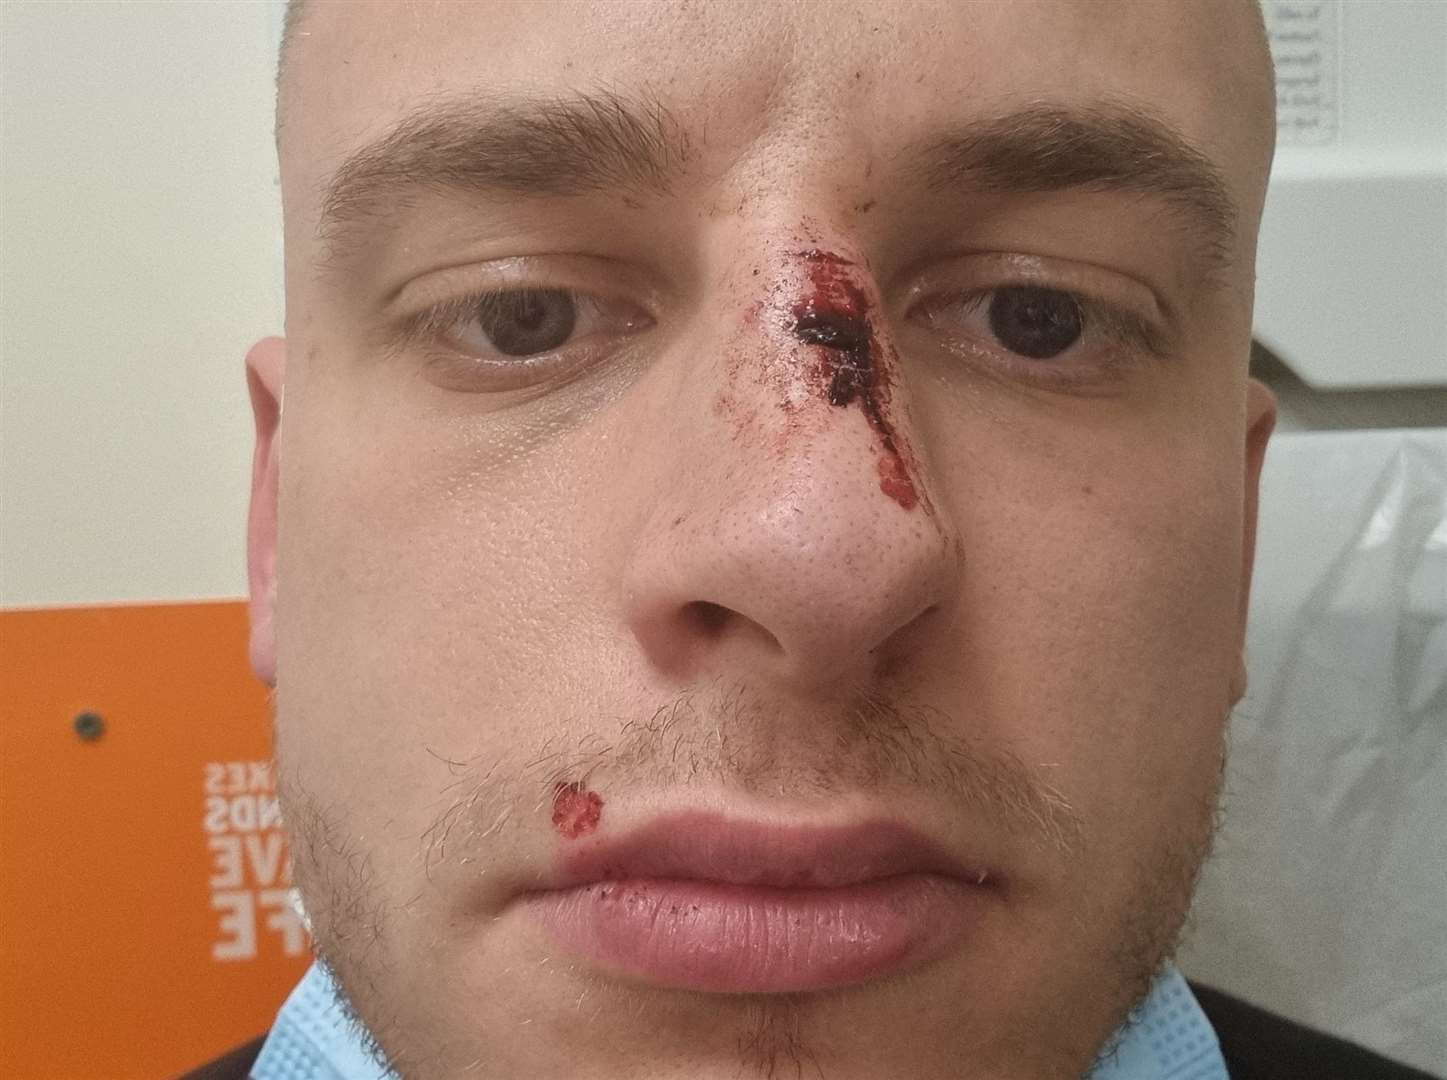 Sean Crittenden was attacked outside Tesco Express at Victory Pier in Gillingham